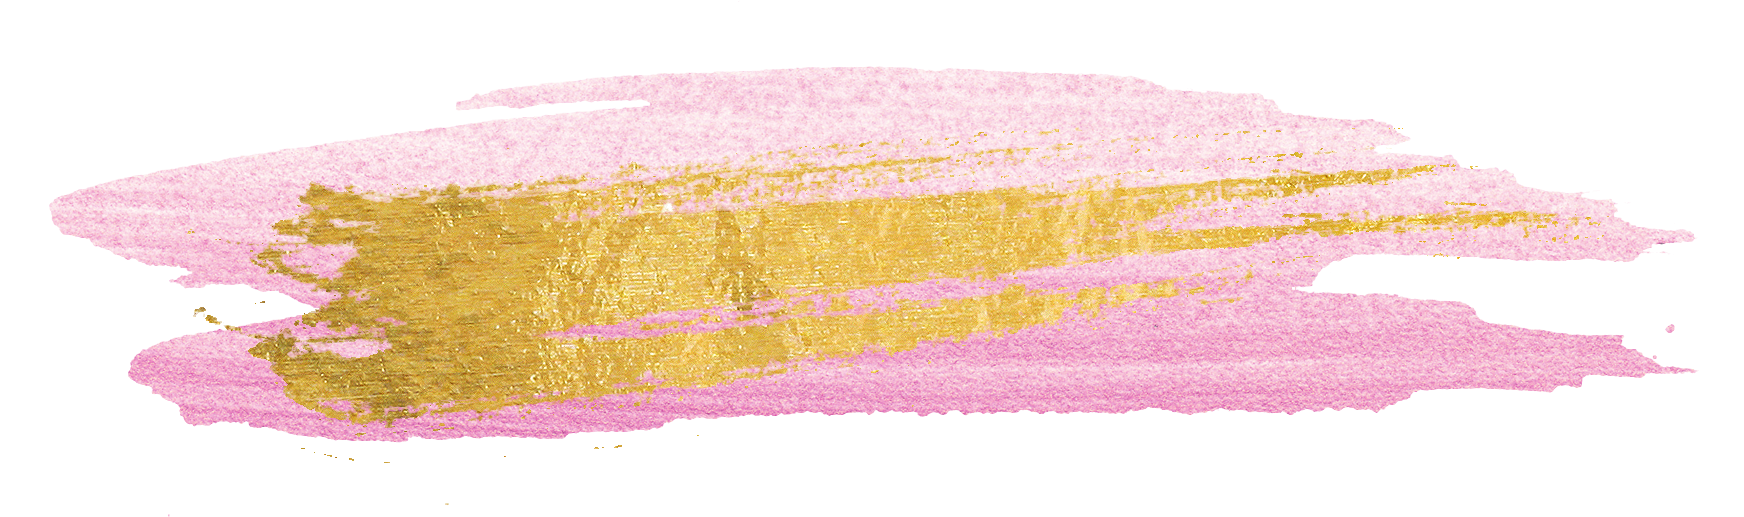 Pink And Gold PNG - 159948